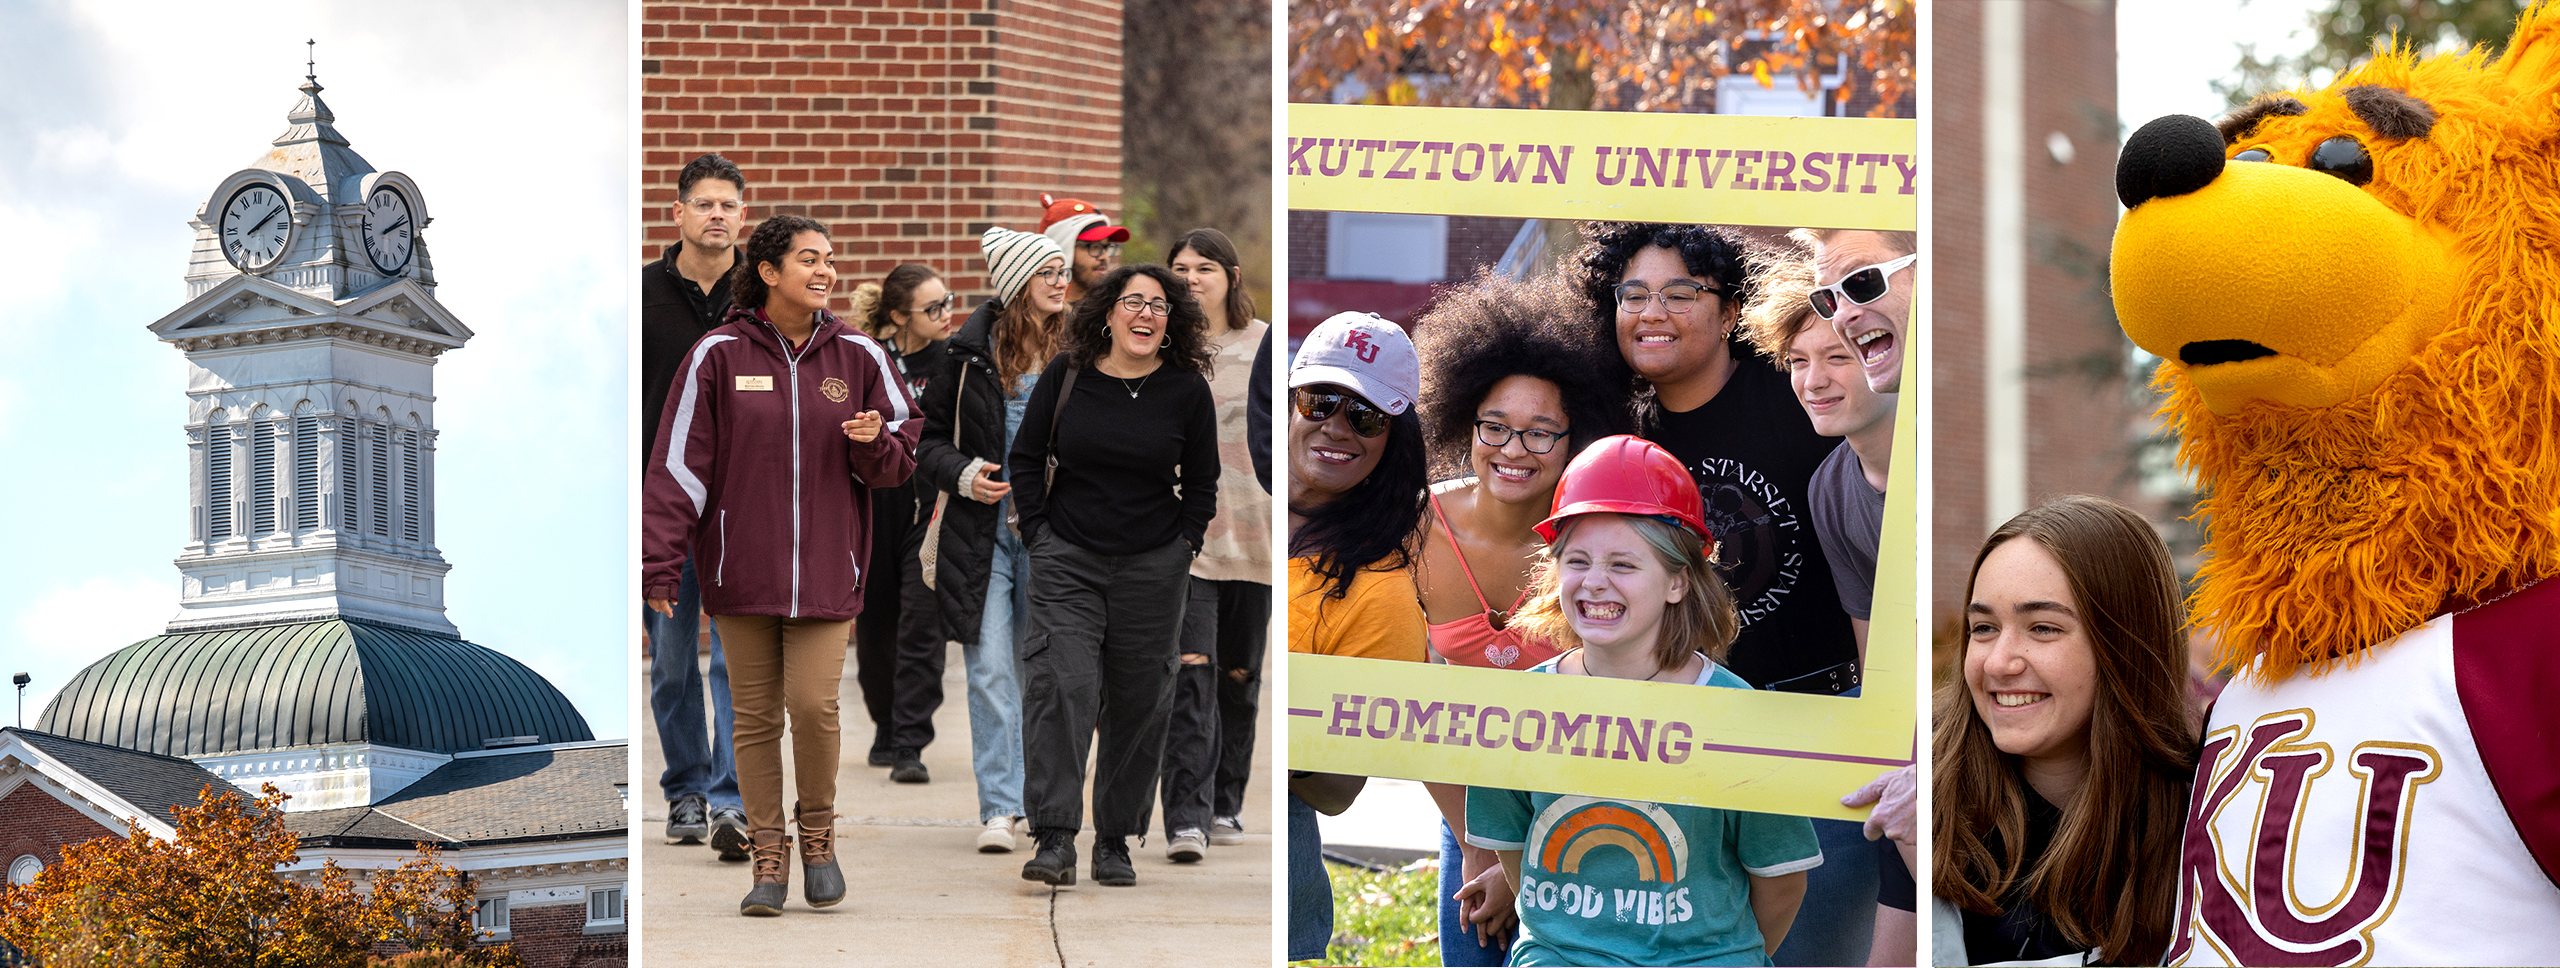 Pictures of tours at Kutztown University